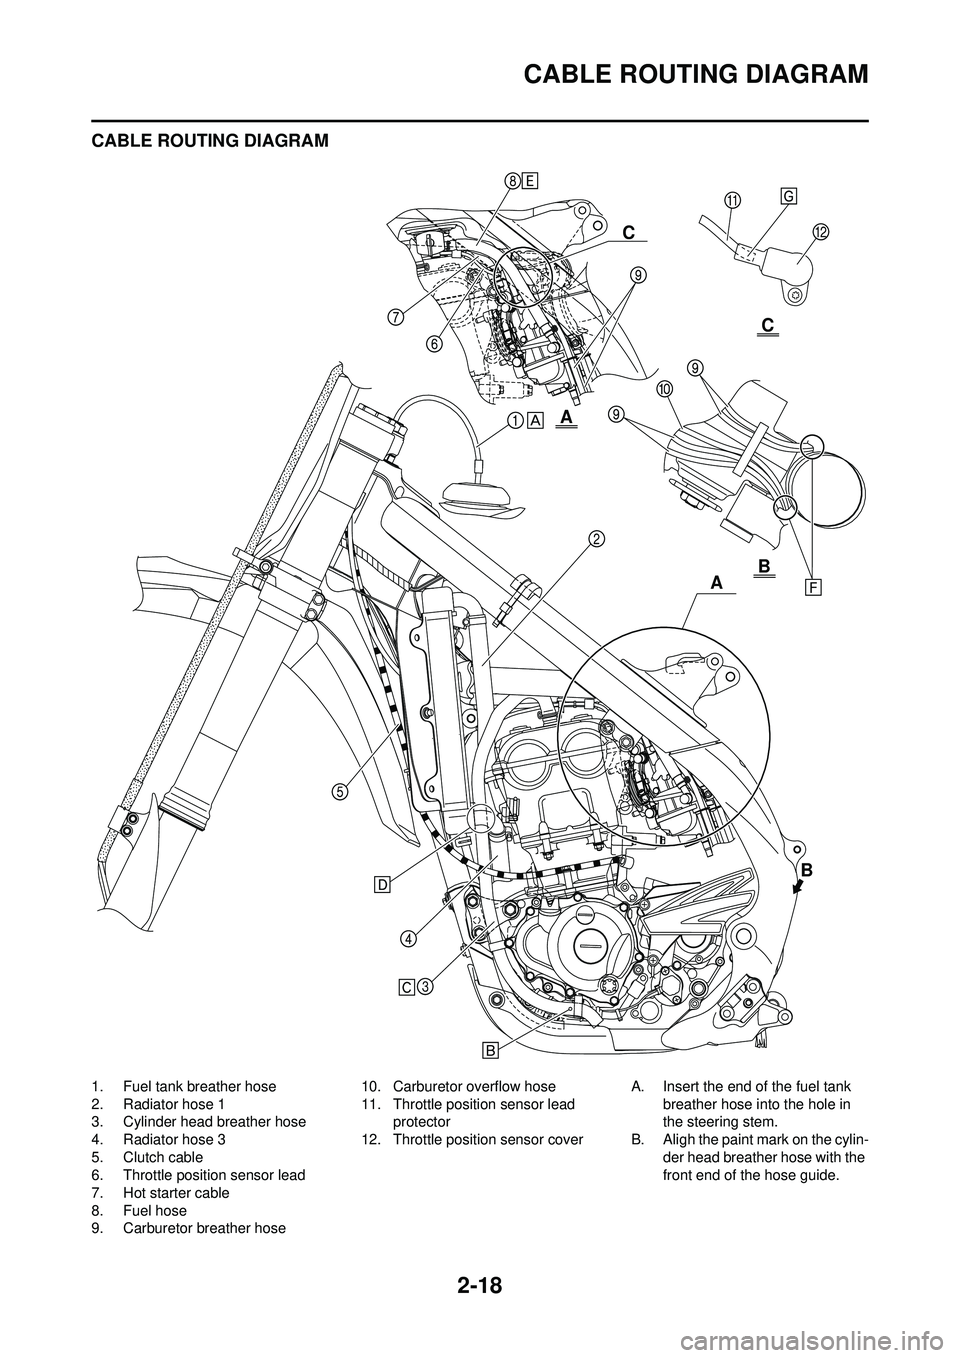 YAMAHA YZ250F 2010  Owners Manual 2-18
CABLE ROUTING DIAGRAM
CABLE ROUTING DIAGRAM
1. Fuel tank breather hose
2. Radiator hose 1
3. Cylinder head breather hose
4. Radiator hose 3
5. Clutch cable
6. Throttle position sensor lead
7. Hot